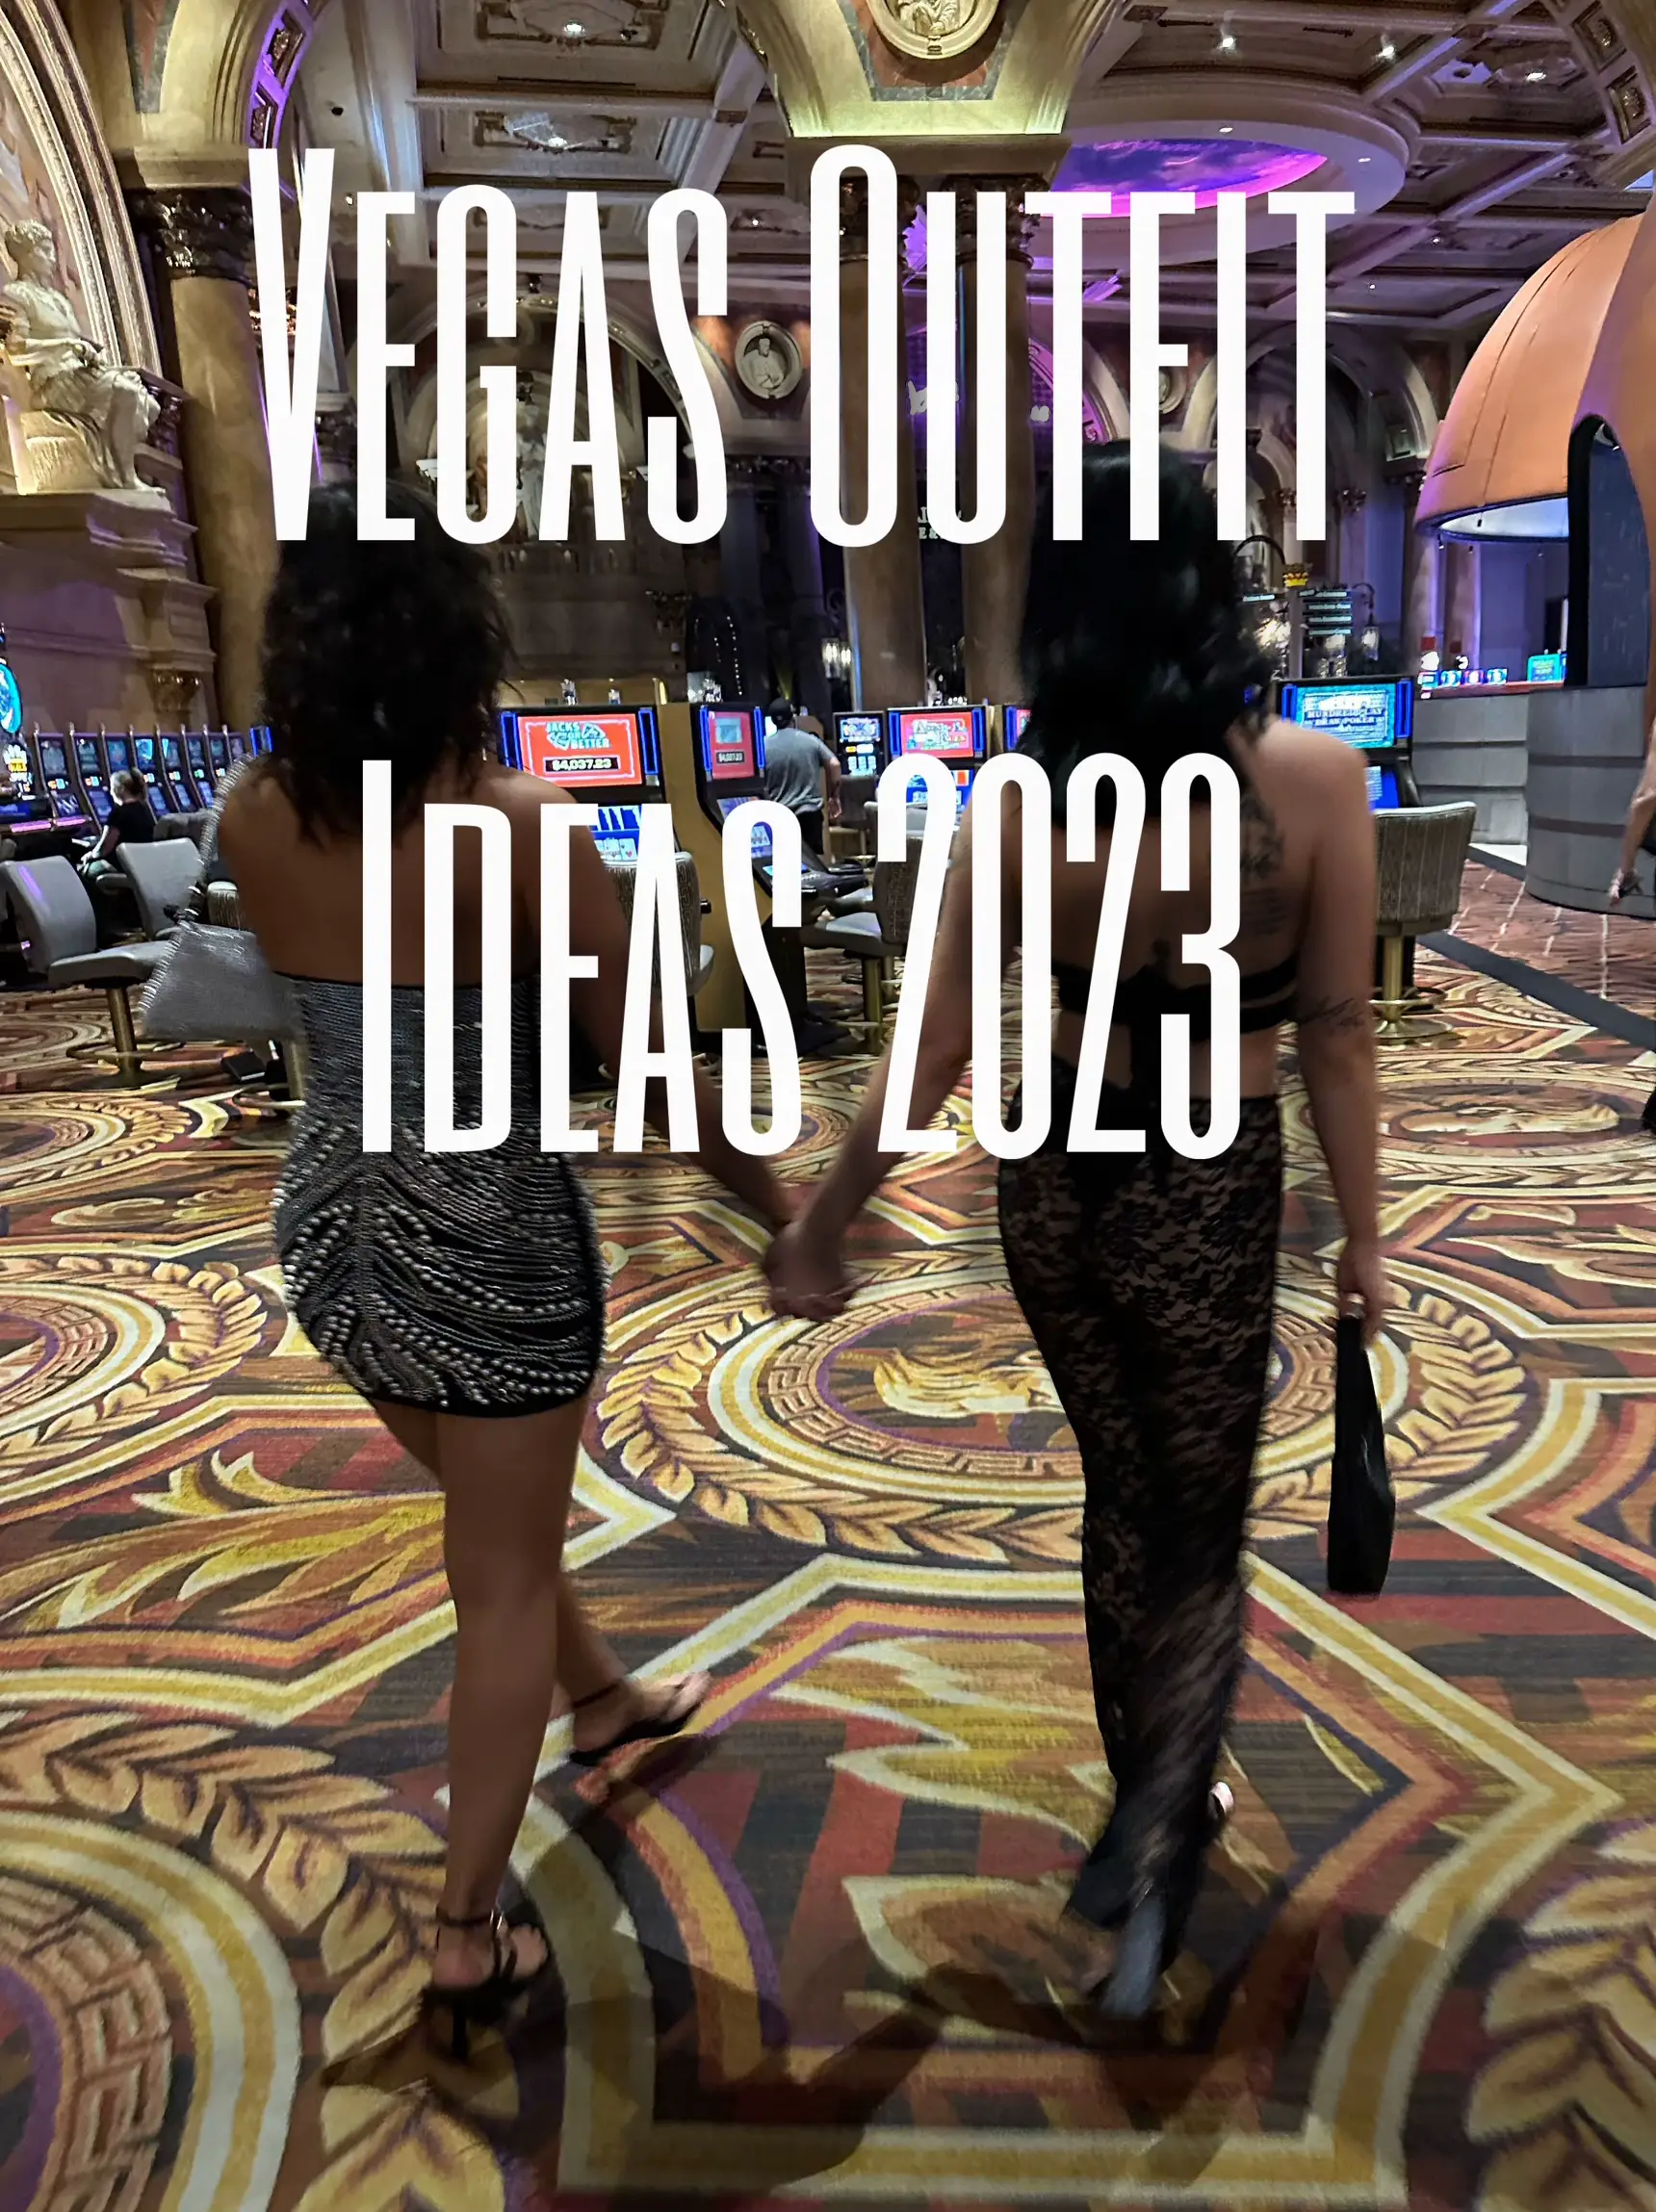 What to Wear for Girls Night Out in Vegas? - Vegas Girls Night Out